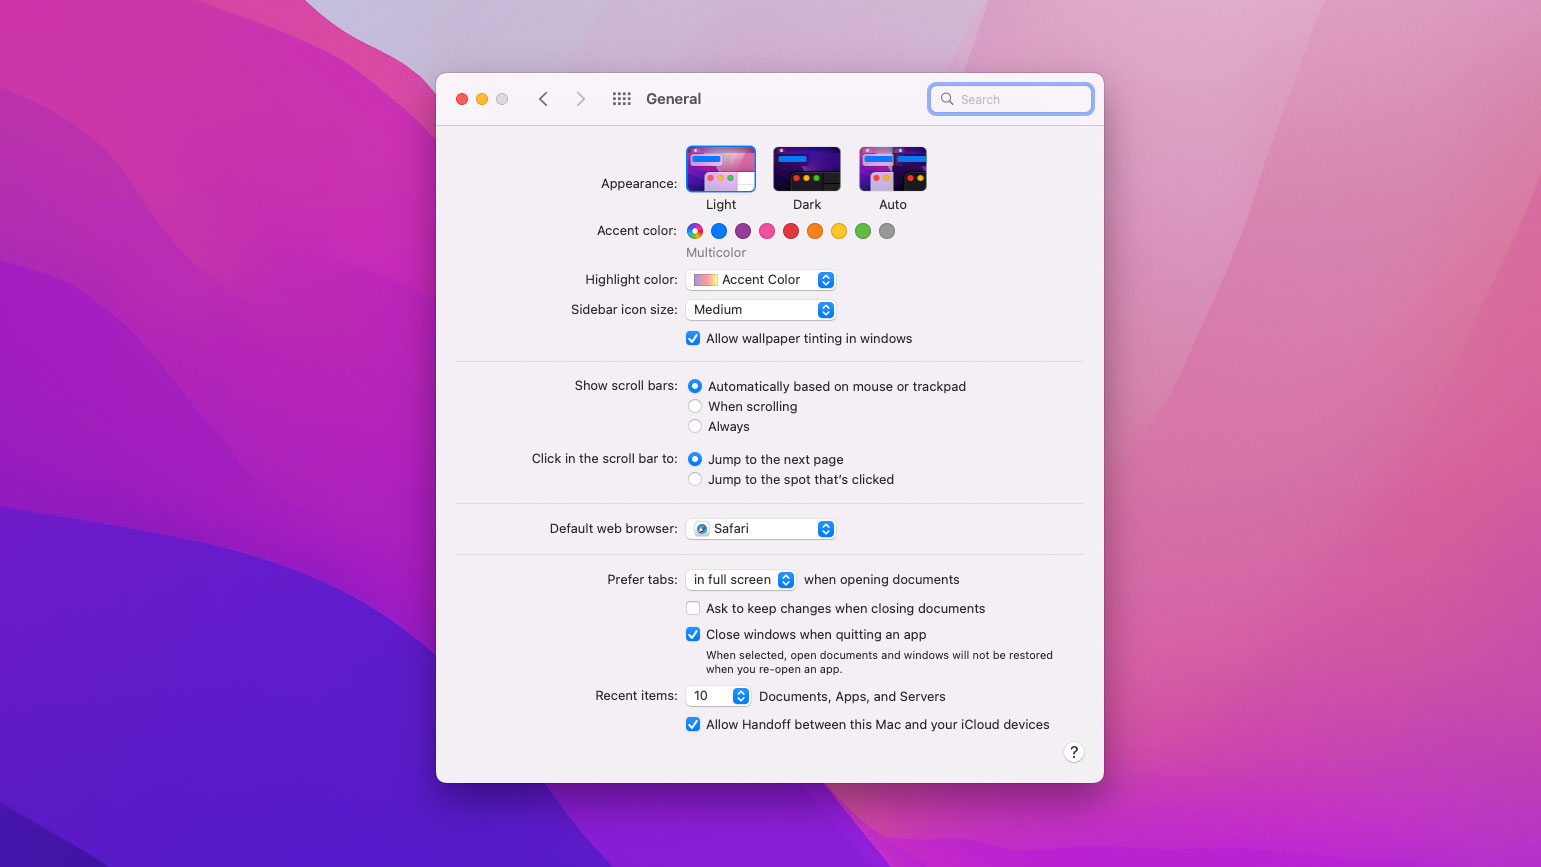 Screenshot of Universal Control feature in macOS